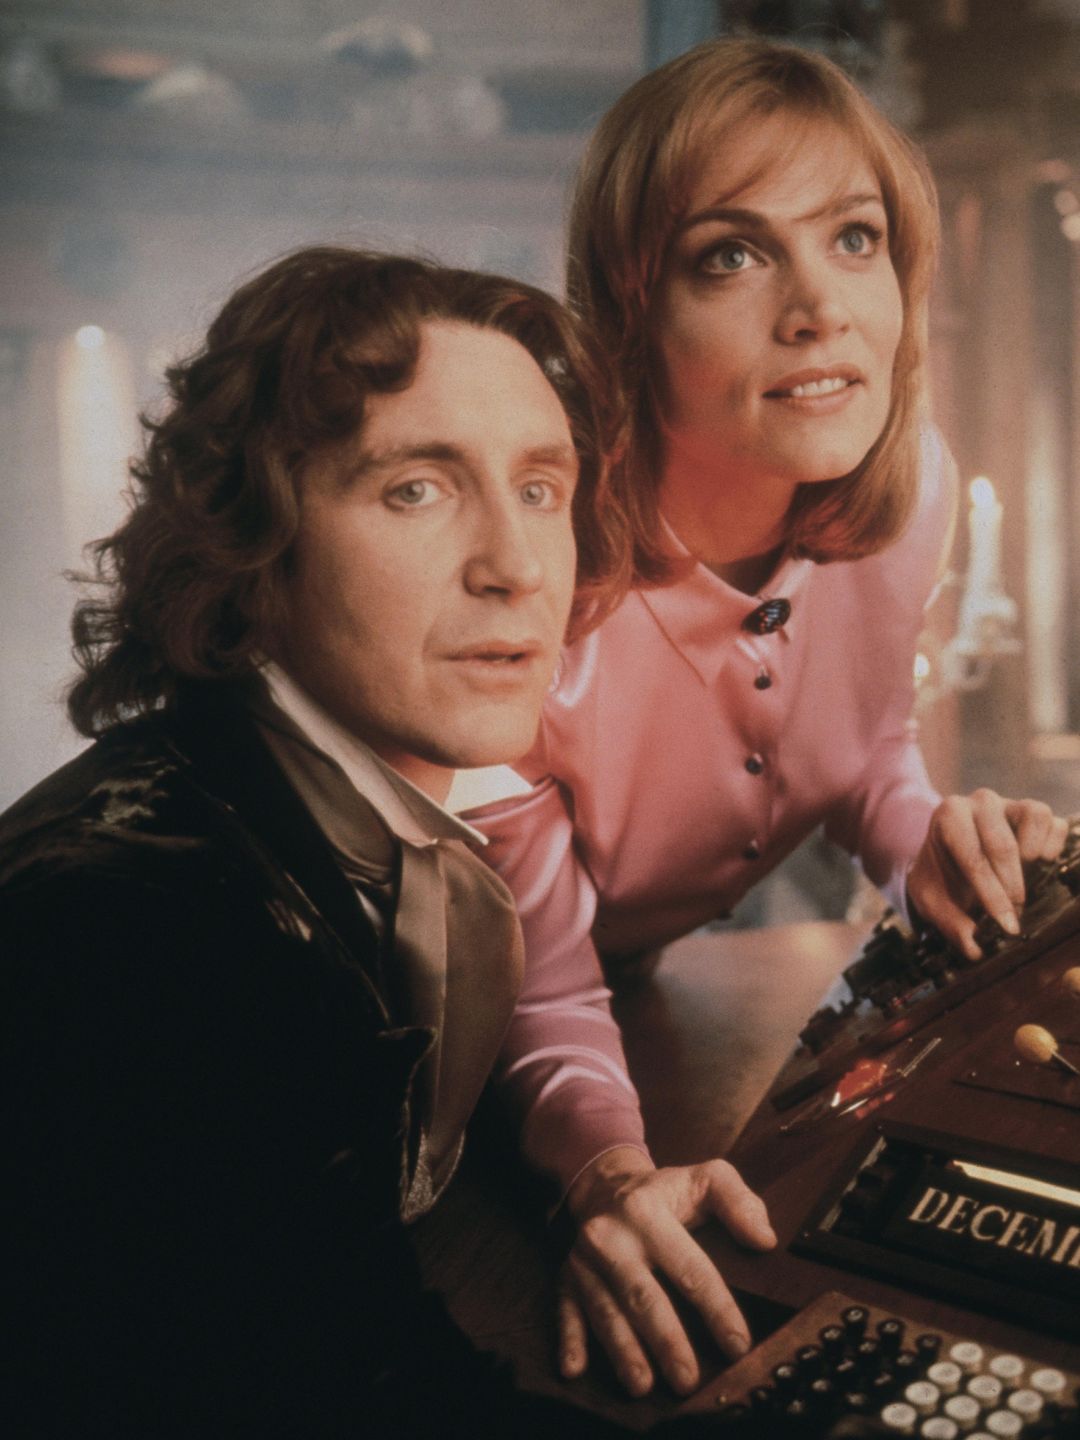 Paul McGann and Daphne Ashrbook in character as The Doctor and Grace Holloway